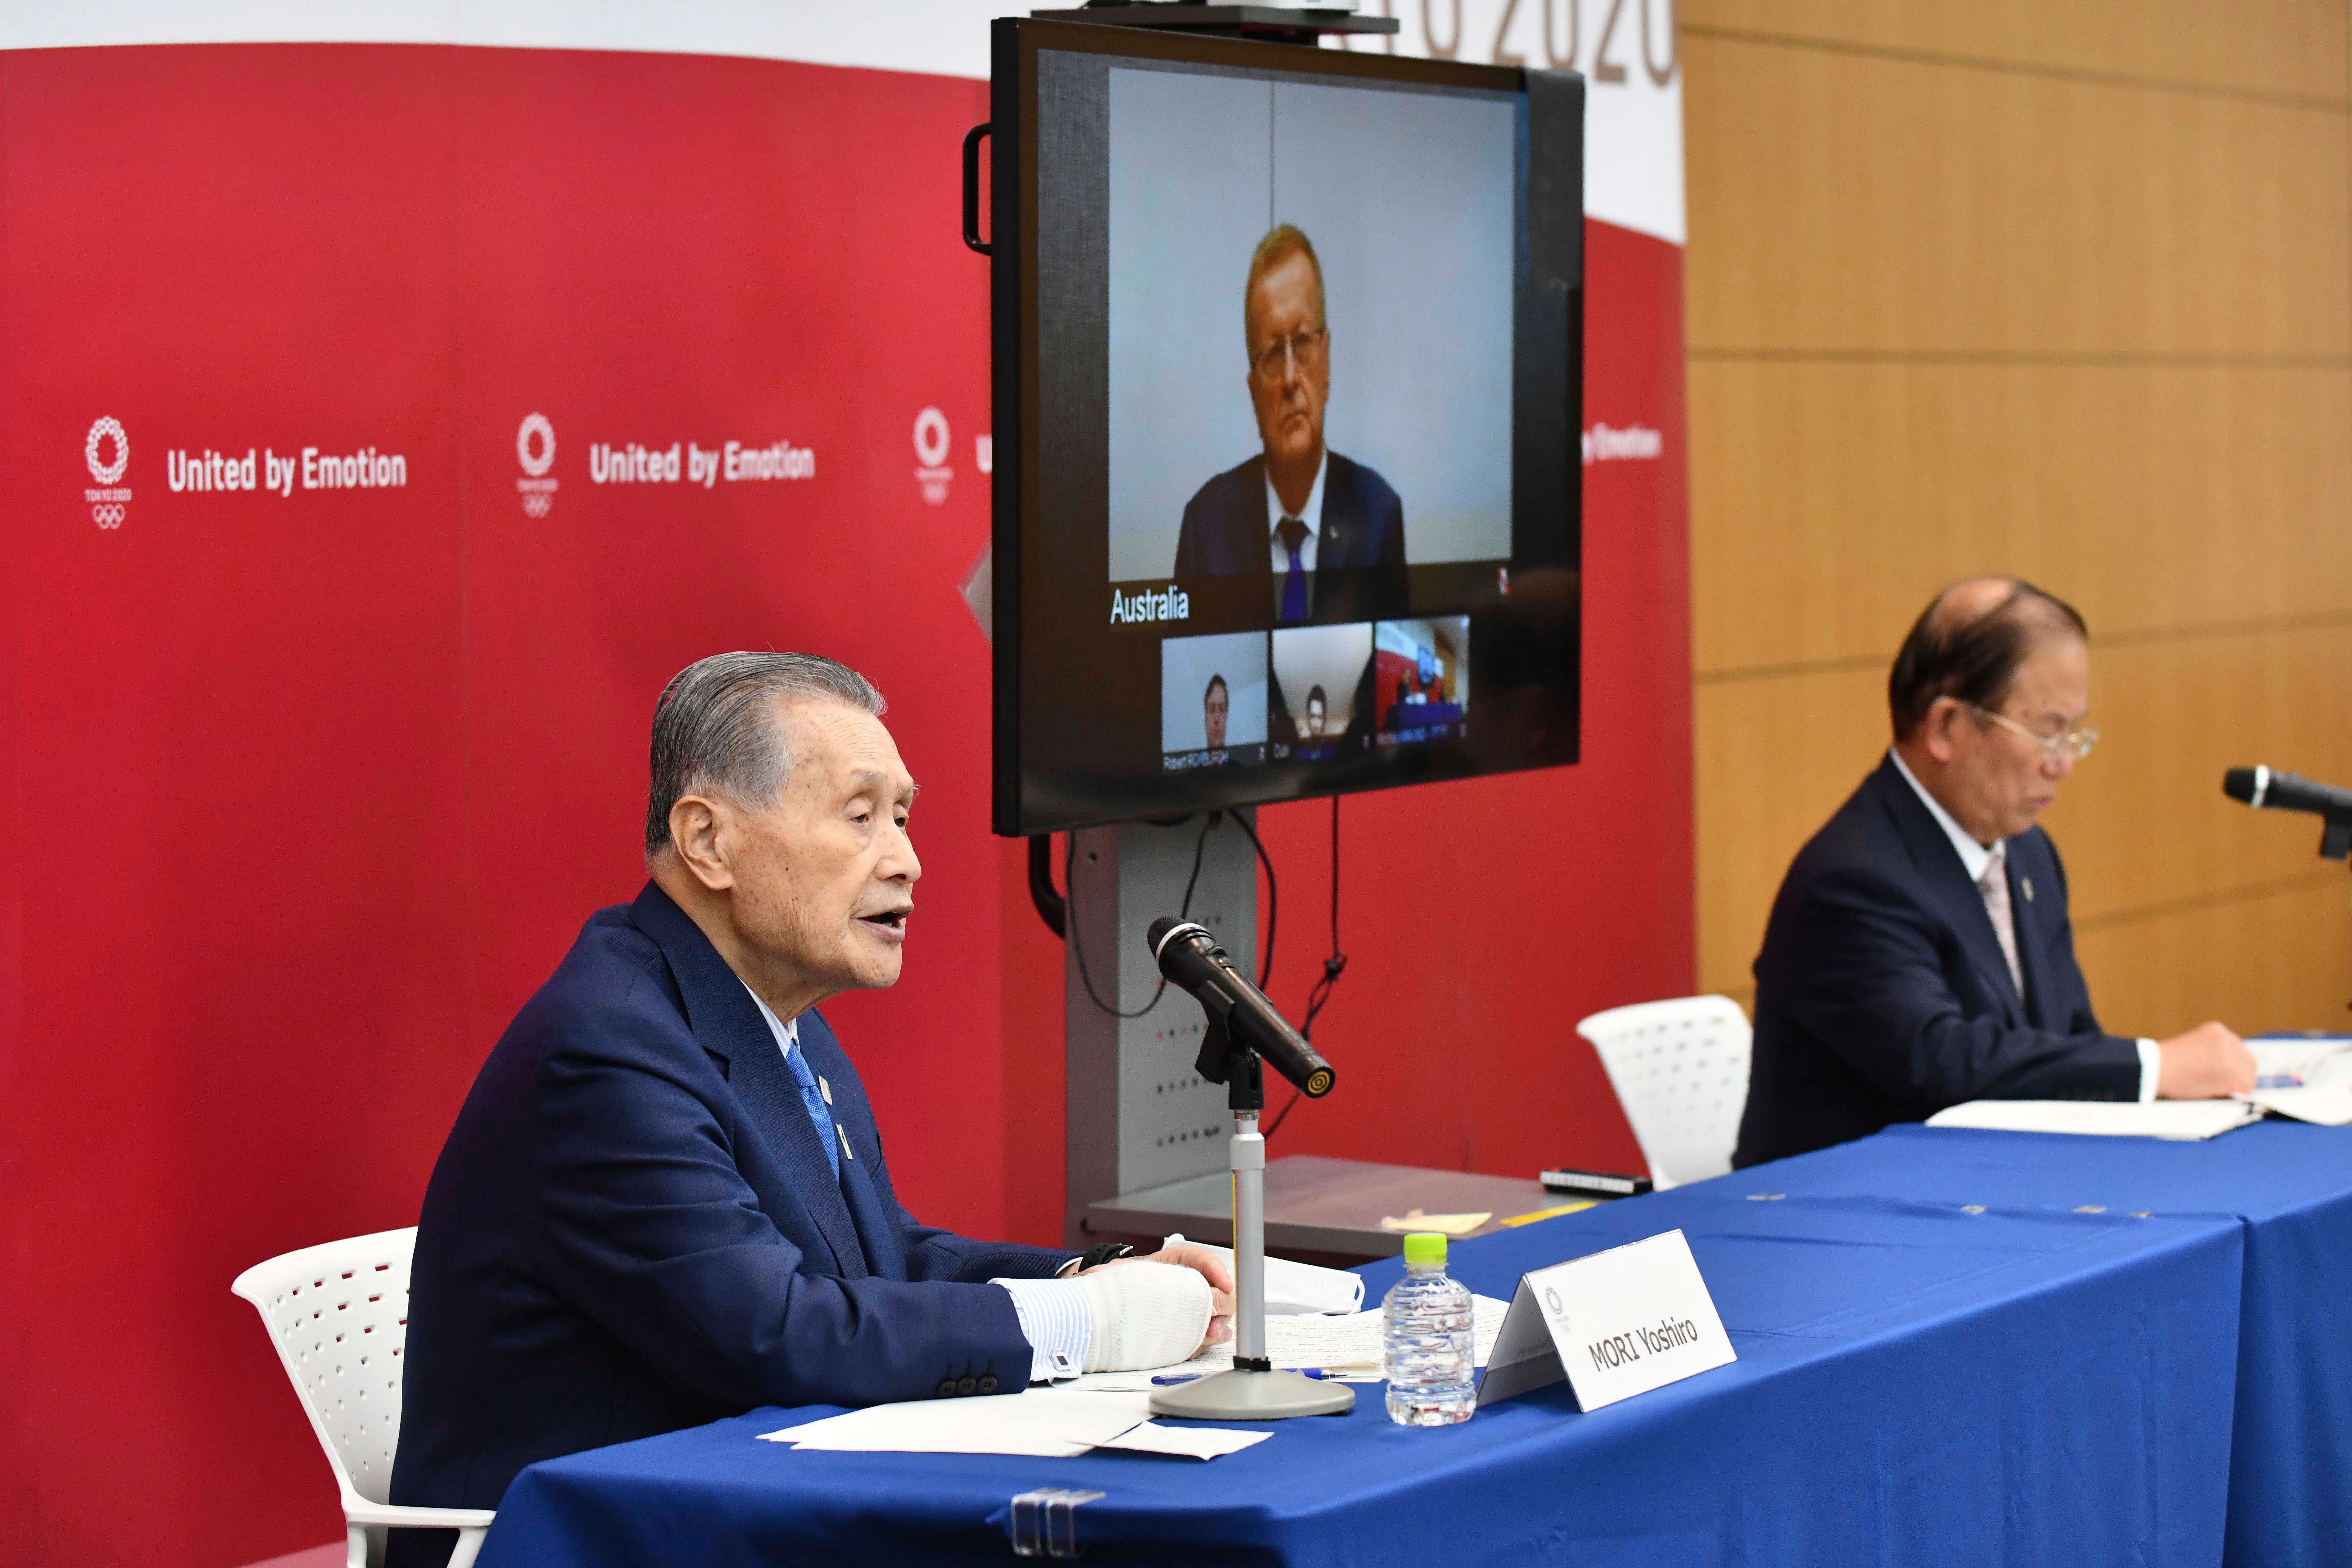  Tokyo 2020 Organizing Committee President Yoshiro Mori, left, and CEO Toshiro Muto, right, attend teleconference with International Olympic Committee member John Coates. (AP Photo)